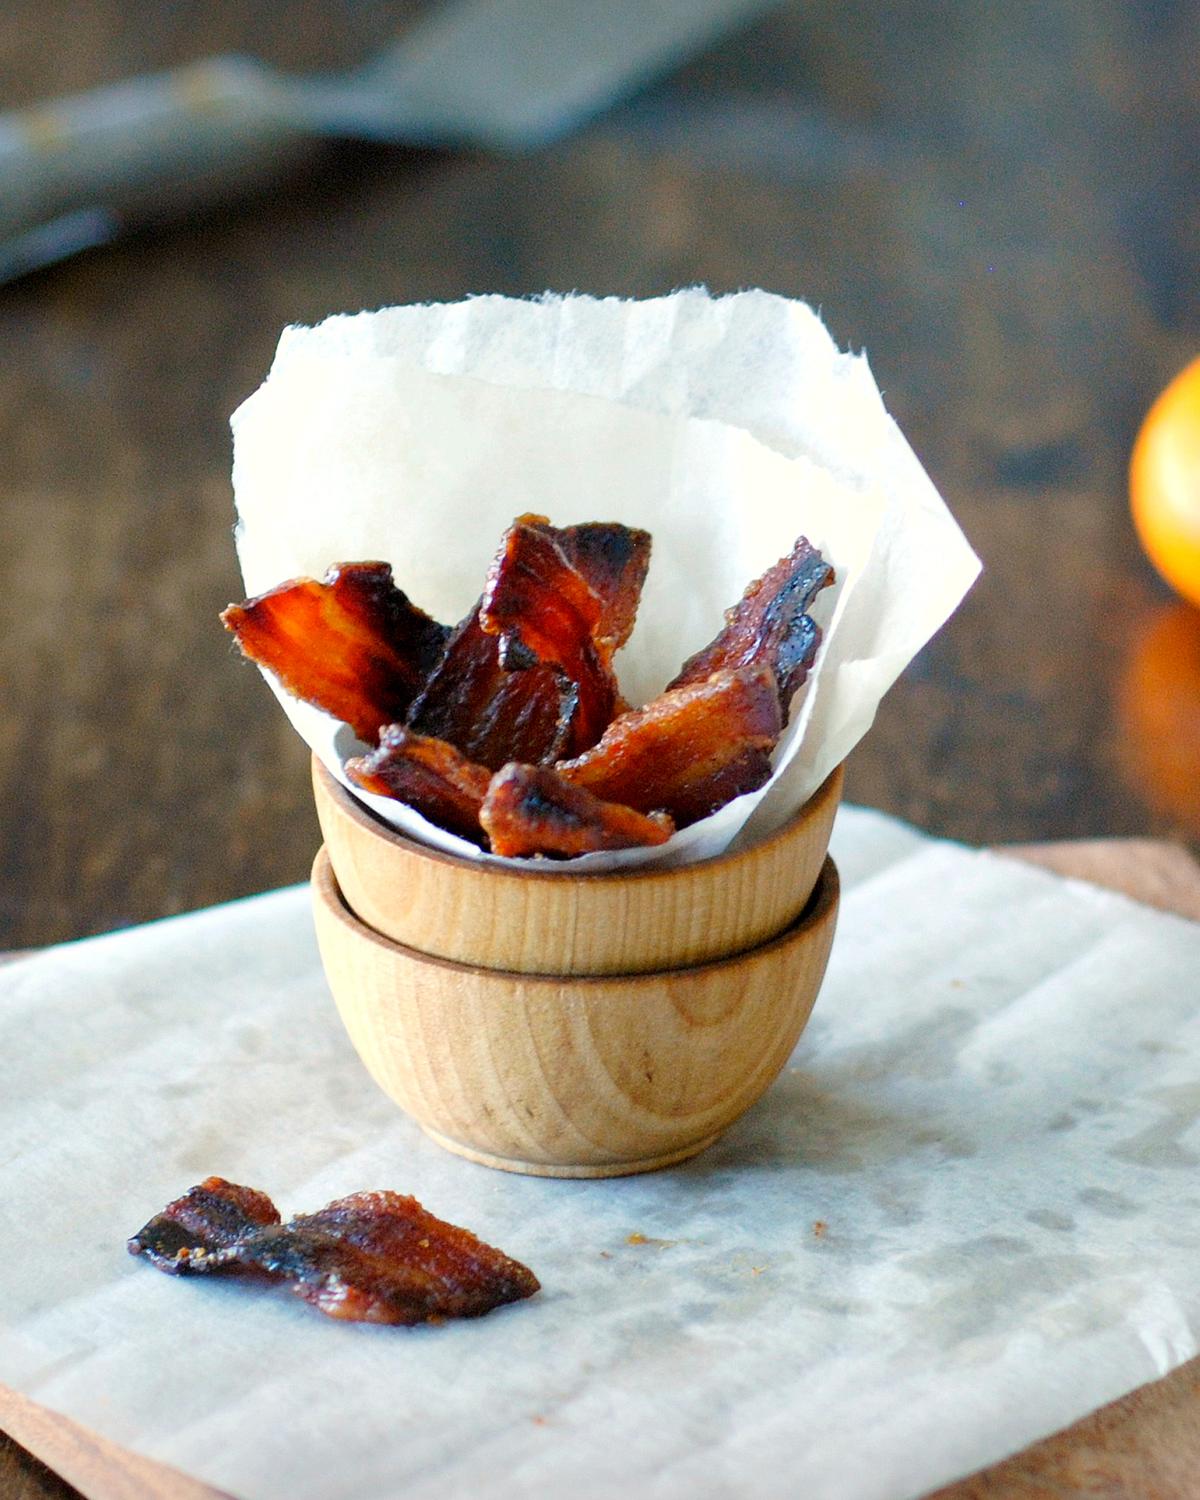 Caramelized bacon chips, roasted in the oven with sugar and spices. (Lynda Balslev for Tastefood)